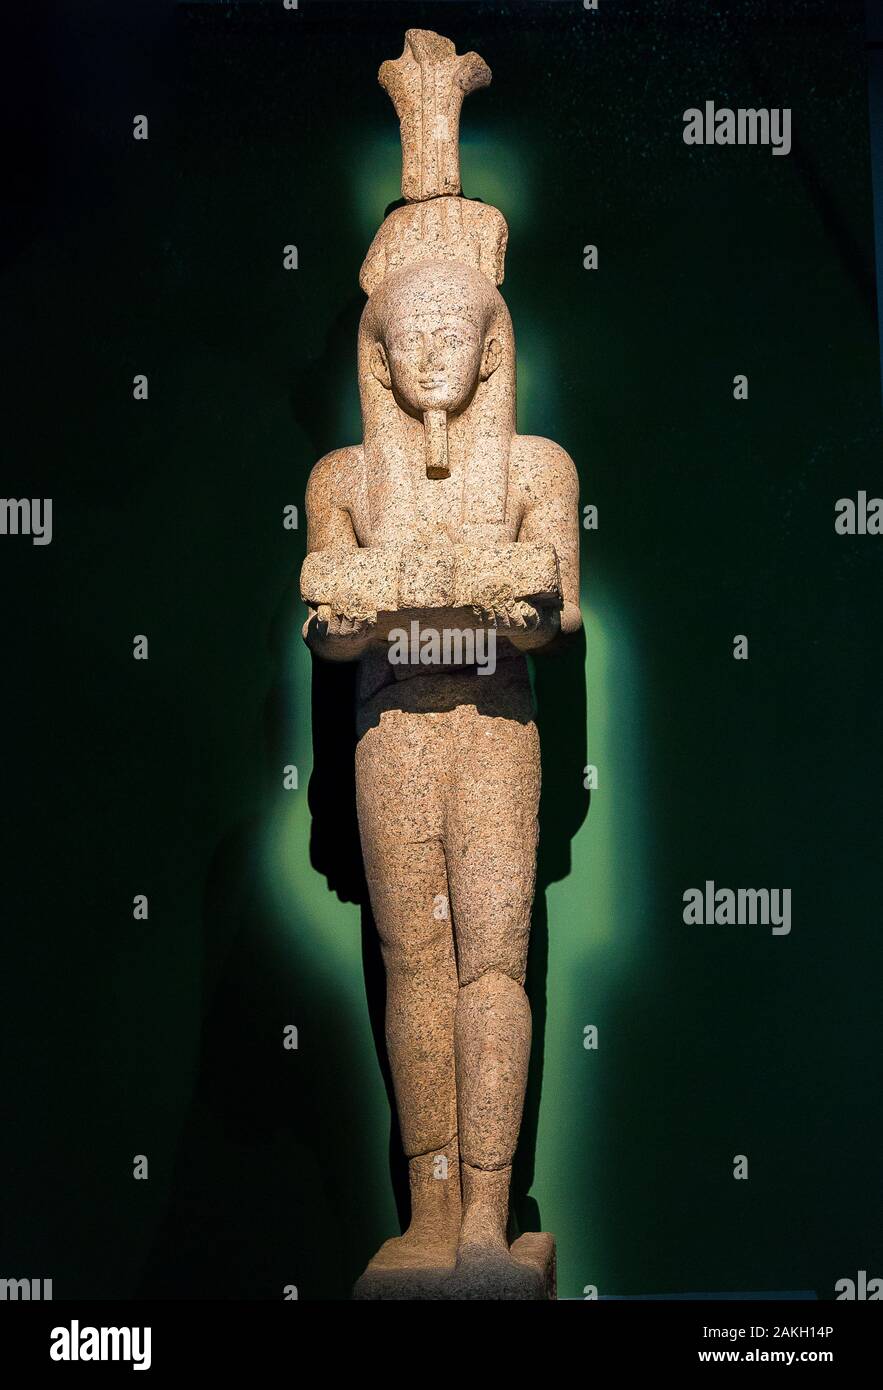 Opening visit of the exhibition “Osiris, Egypt's Sunken Mysteries”. Colossal statue of the god Hapy presenting an offering table. Stock Photo